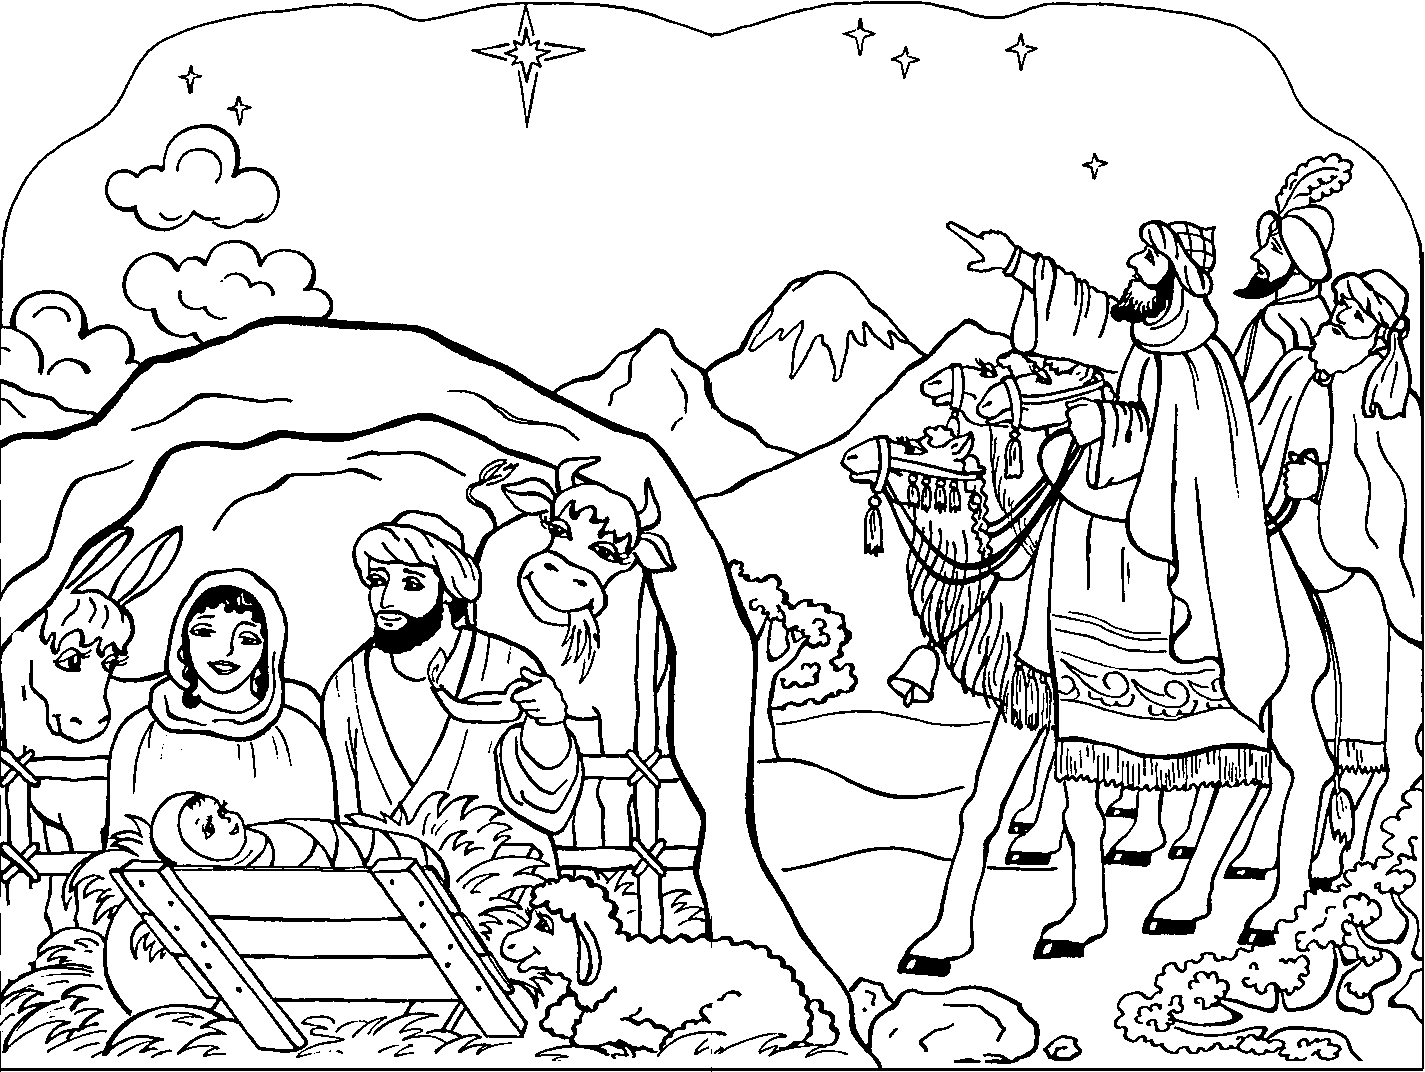 nativity scene coloring pages jannieswrite stormy night a full cast a short scene coloring pages nativity 